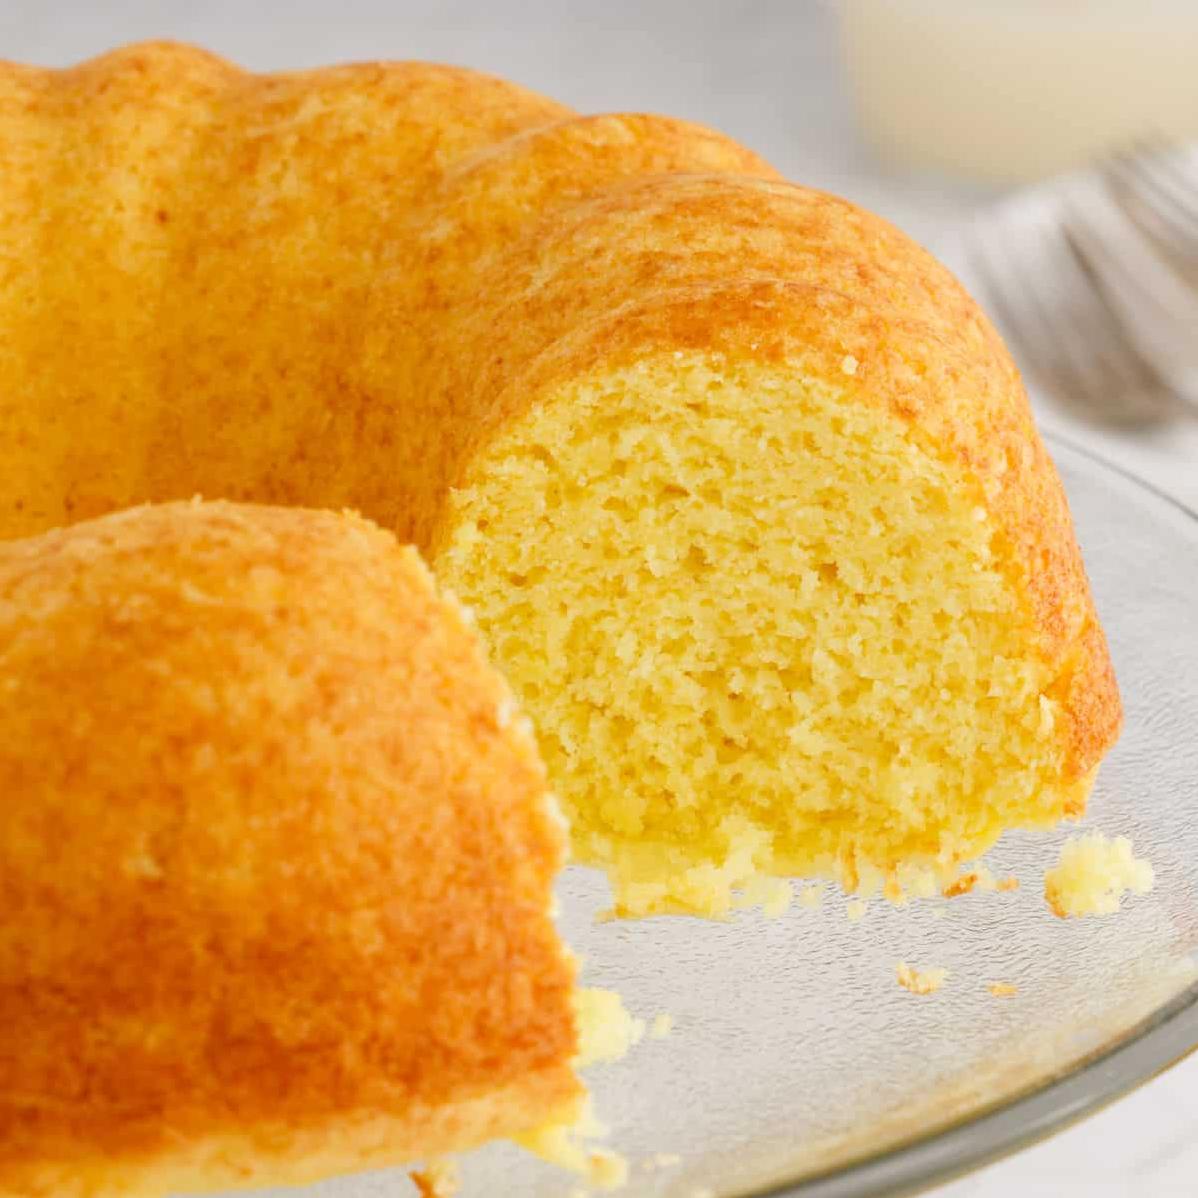  Prepare to be amazed by this deliciously tangy lemon pound cake!